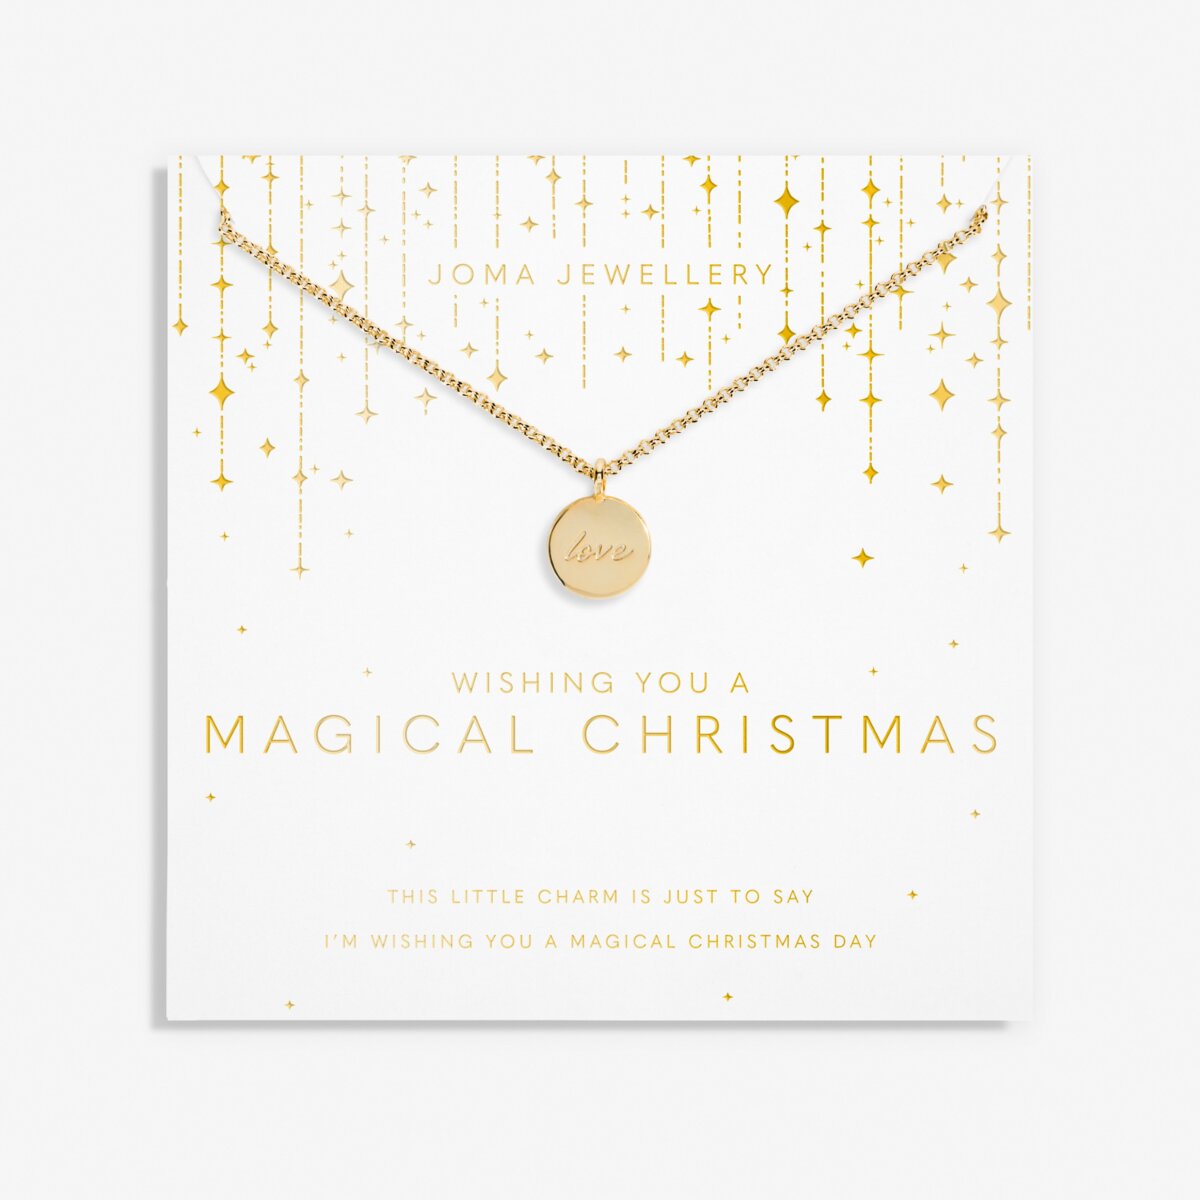 JOMA JEWELLERY | MY MOMENTS CHARISTMAS | WISHING YOU A MAGICAL CHRISTMAS NECKLACE